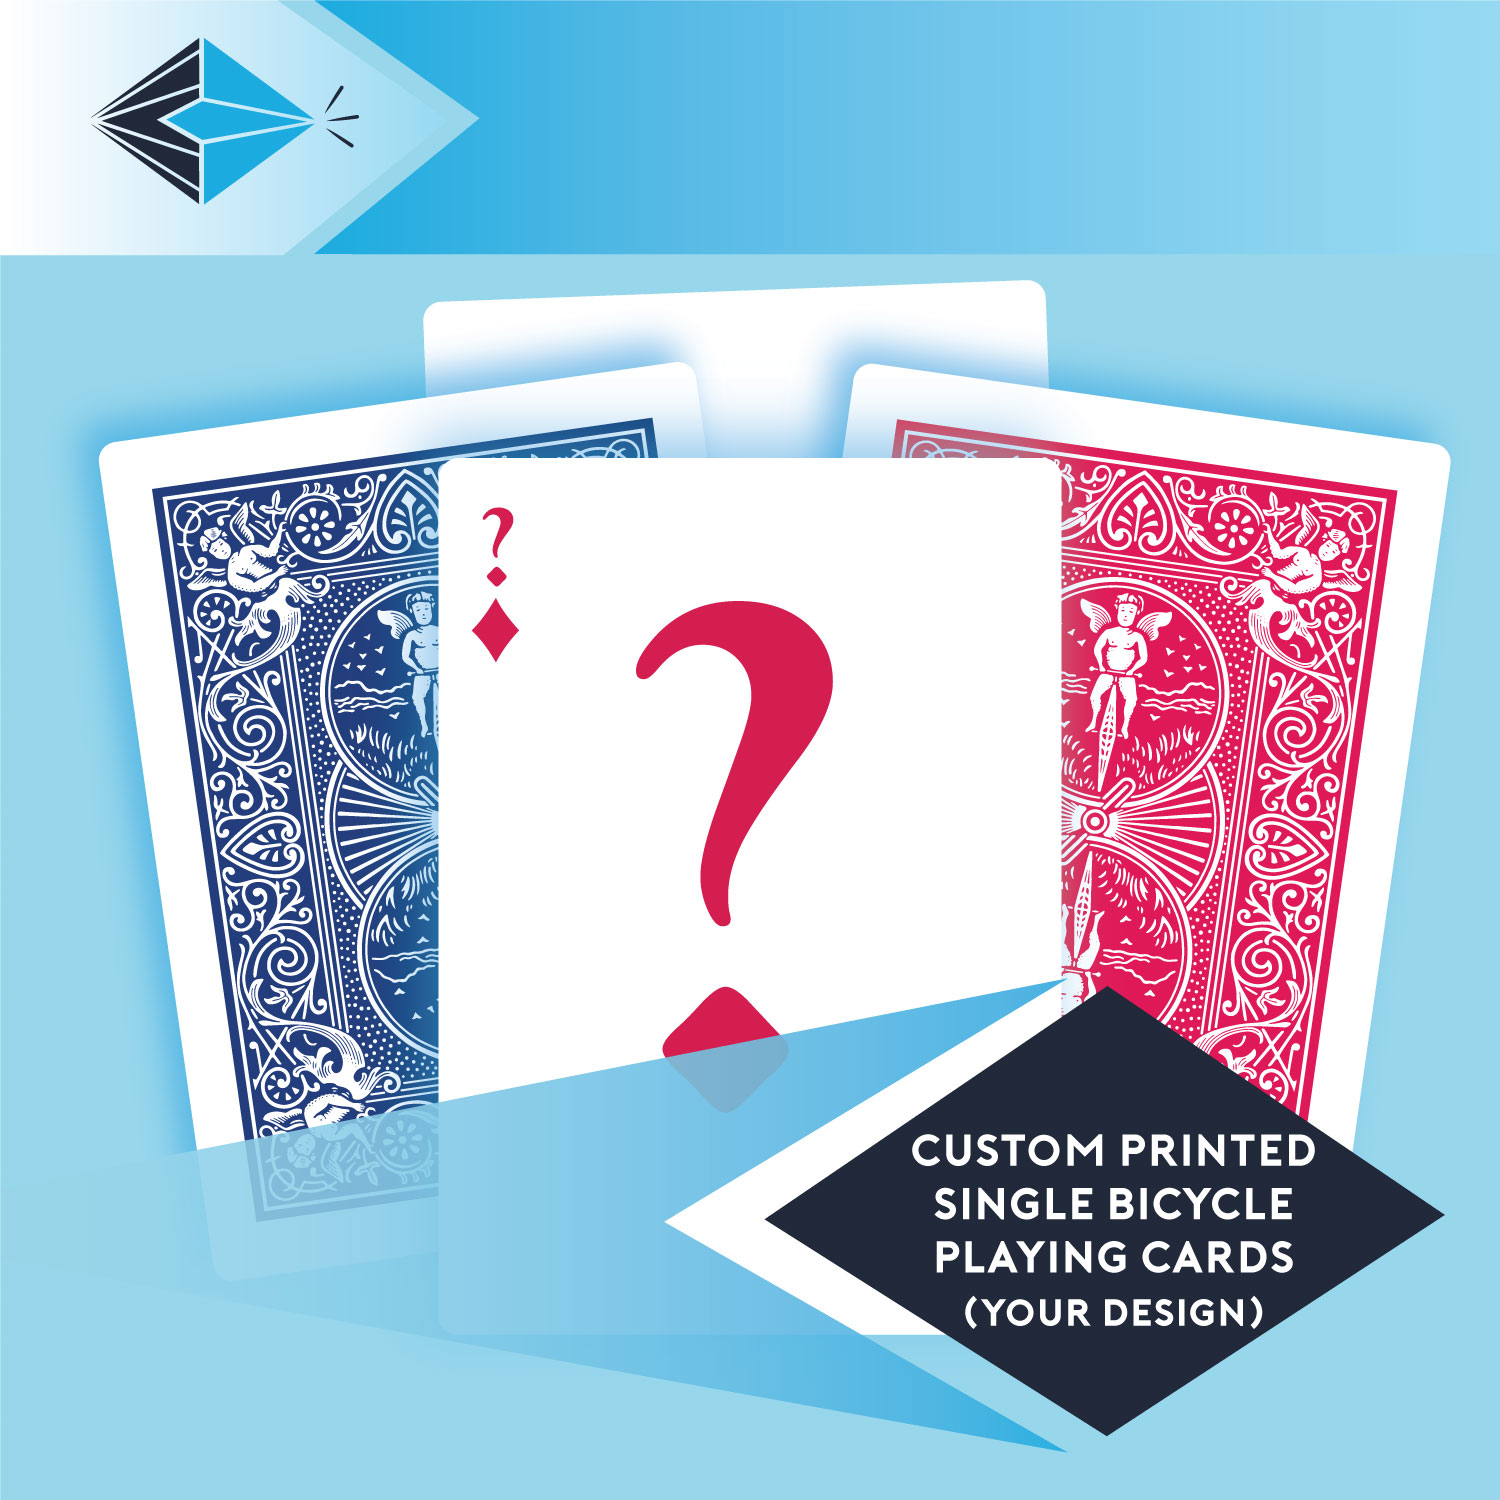 Custom printed single bicycle playing cards for magicicans printed with your image PrintbyMagic Stockport Manchester UK Printers